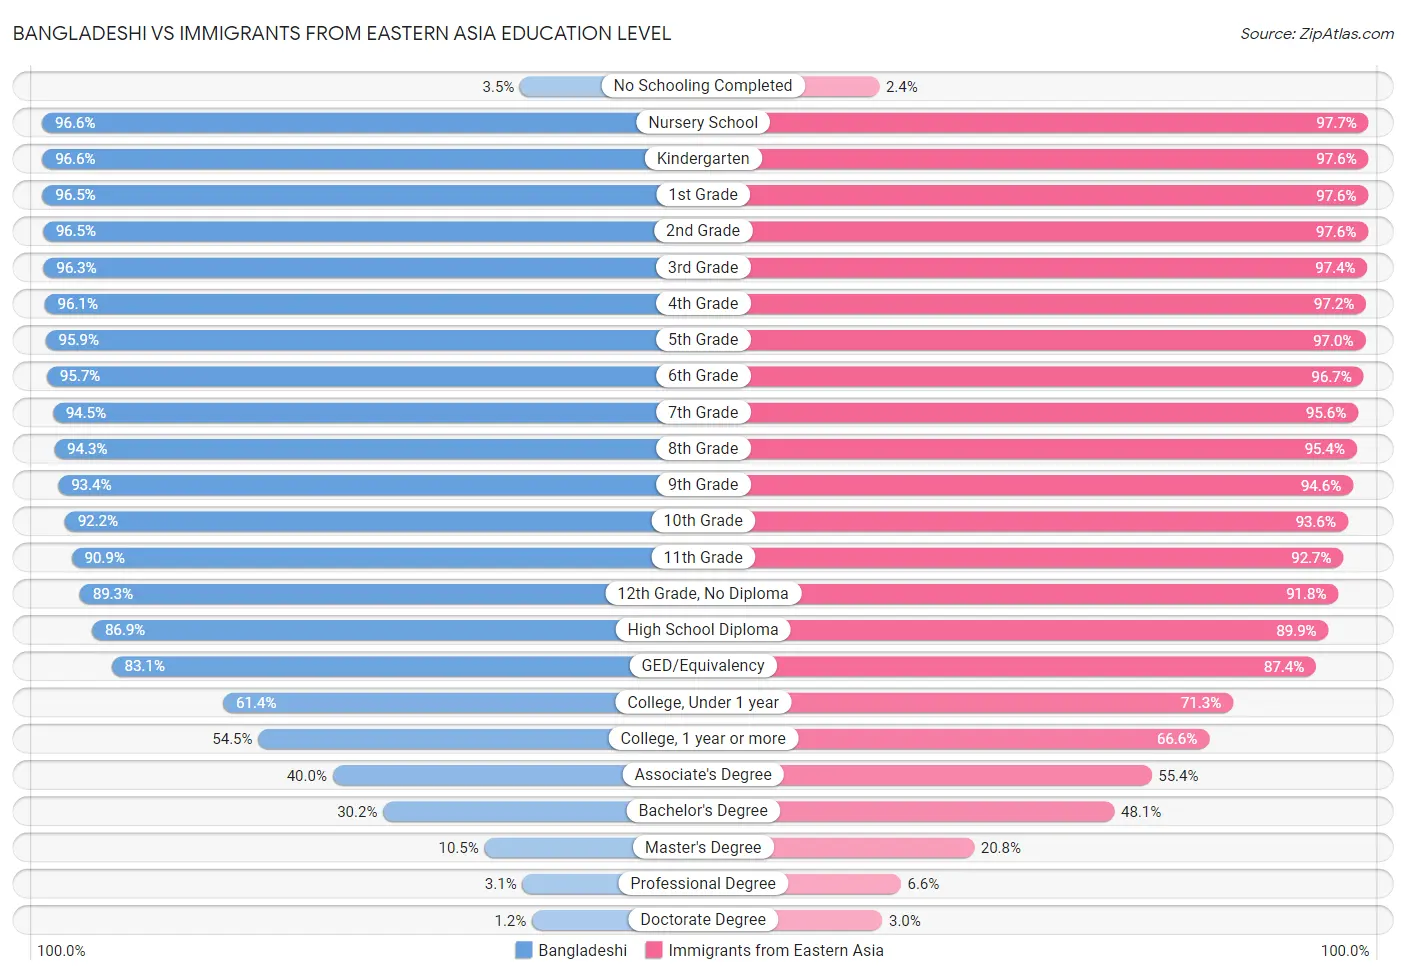 Bangladeshi vs Immigrants from Eastern Asia Education Level